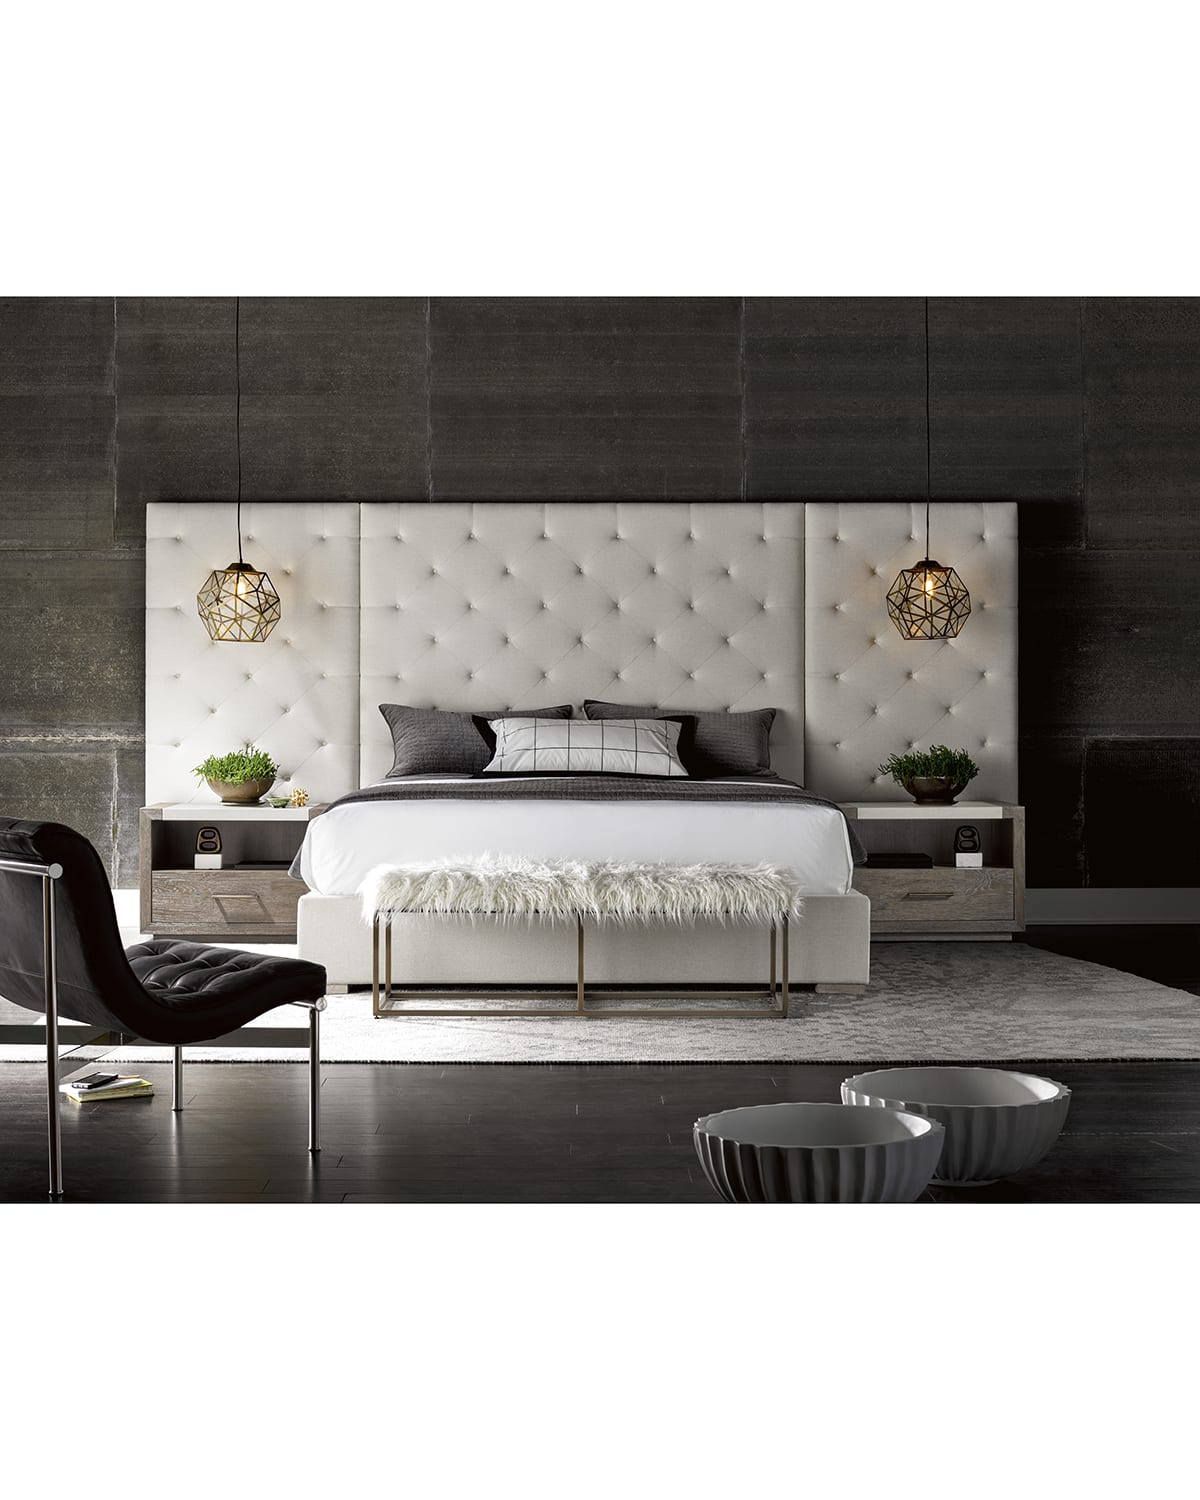 Universal Furniture Parigi Tufted Queen Bed With Panels In Ivory